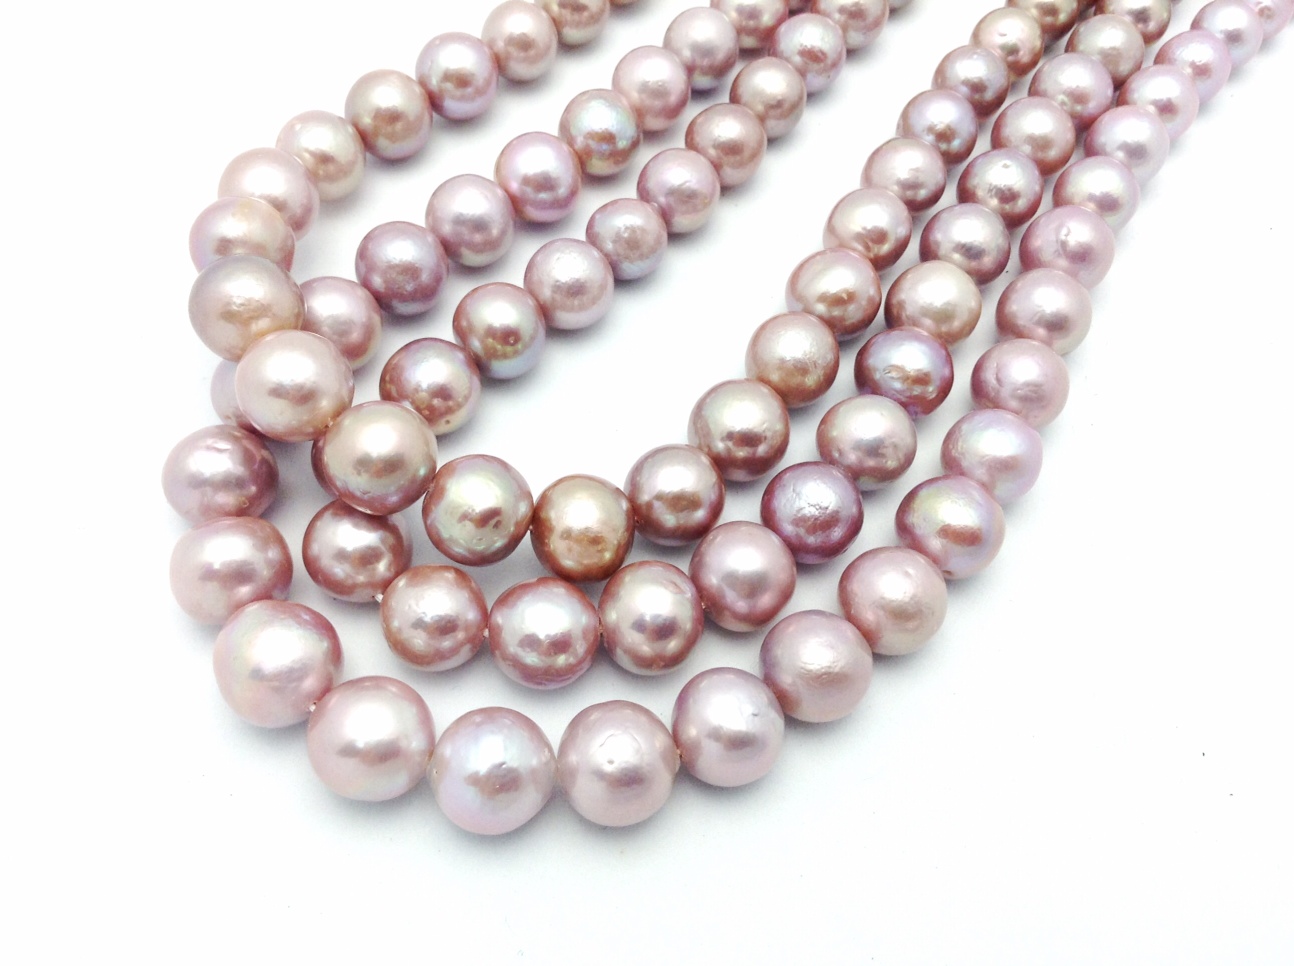 Pearls can have small blemishes and still look Gorgeous!